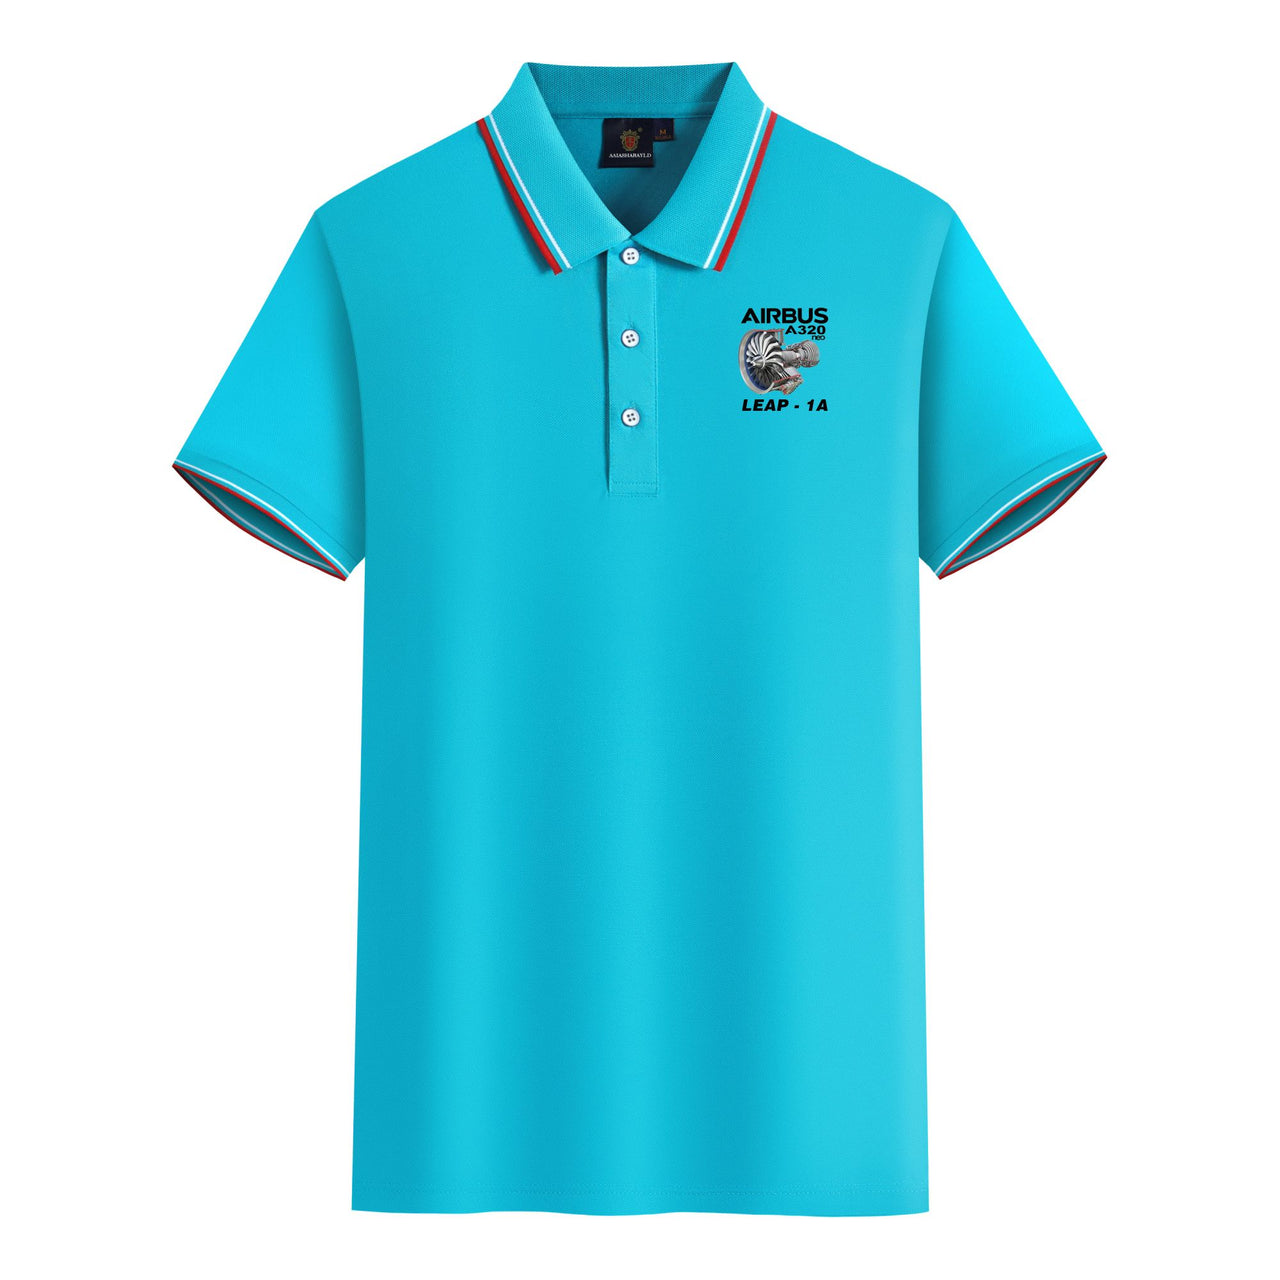 Airbus A320neo & Leap 1A Designed Stylish Polo T-Shirts